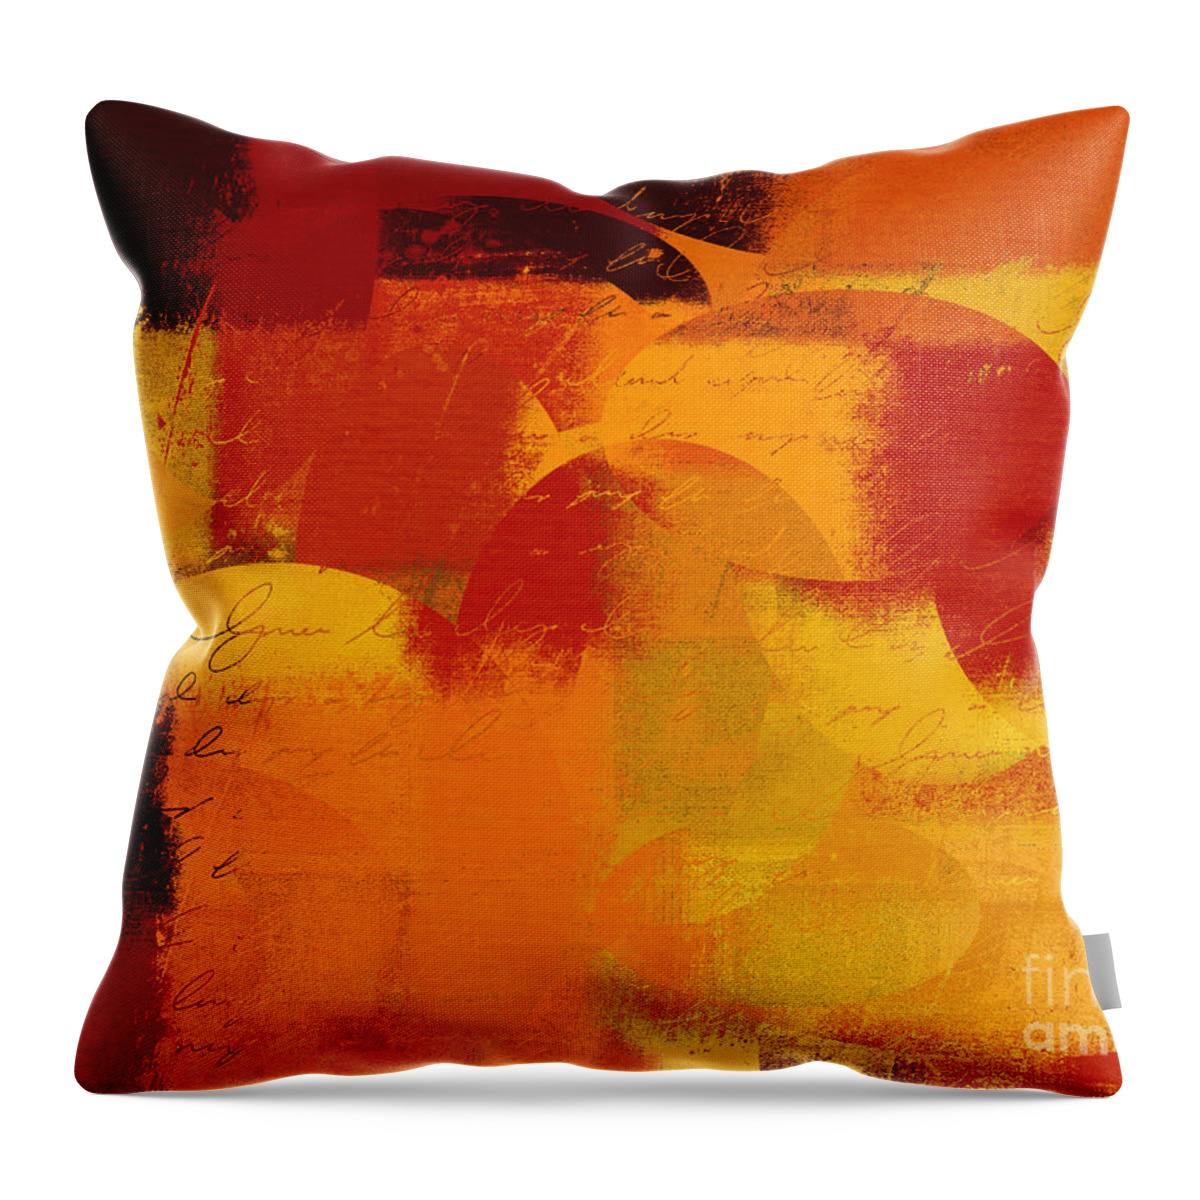 Orange Throw Pillow featuring the digital art Geomix 05 - 01at01b by Variance Collections